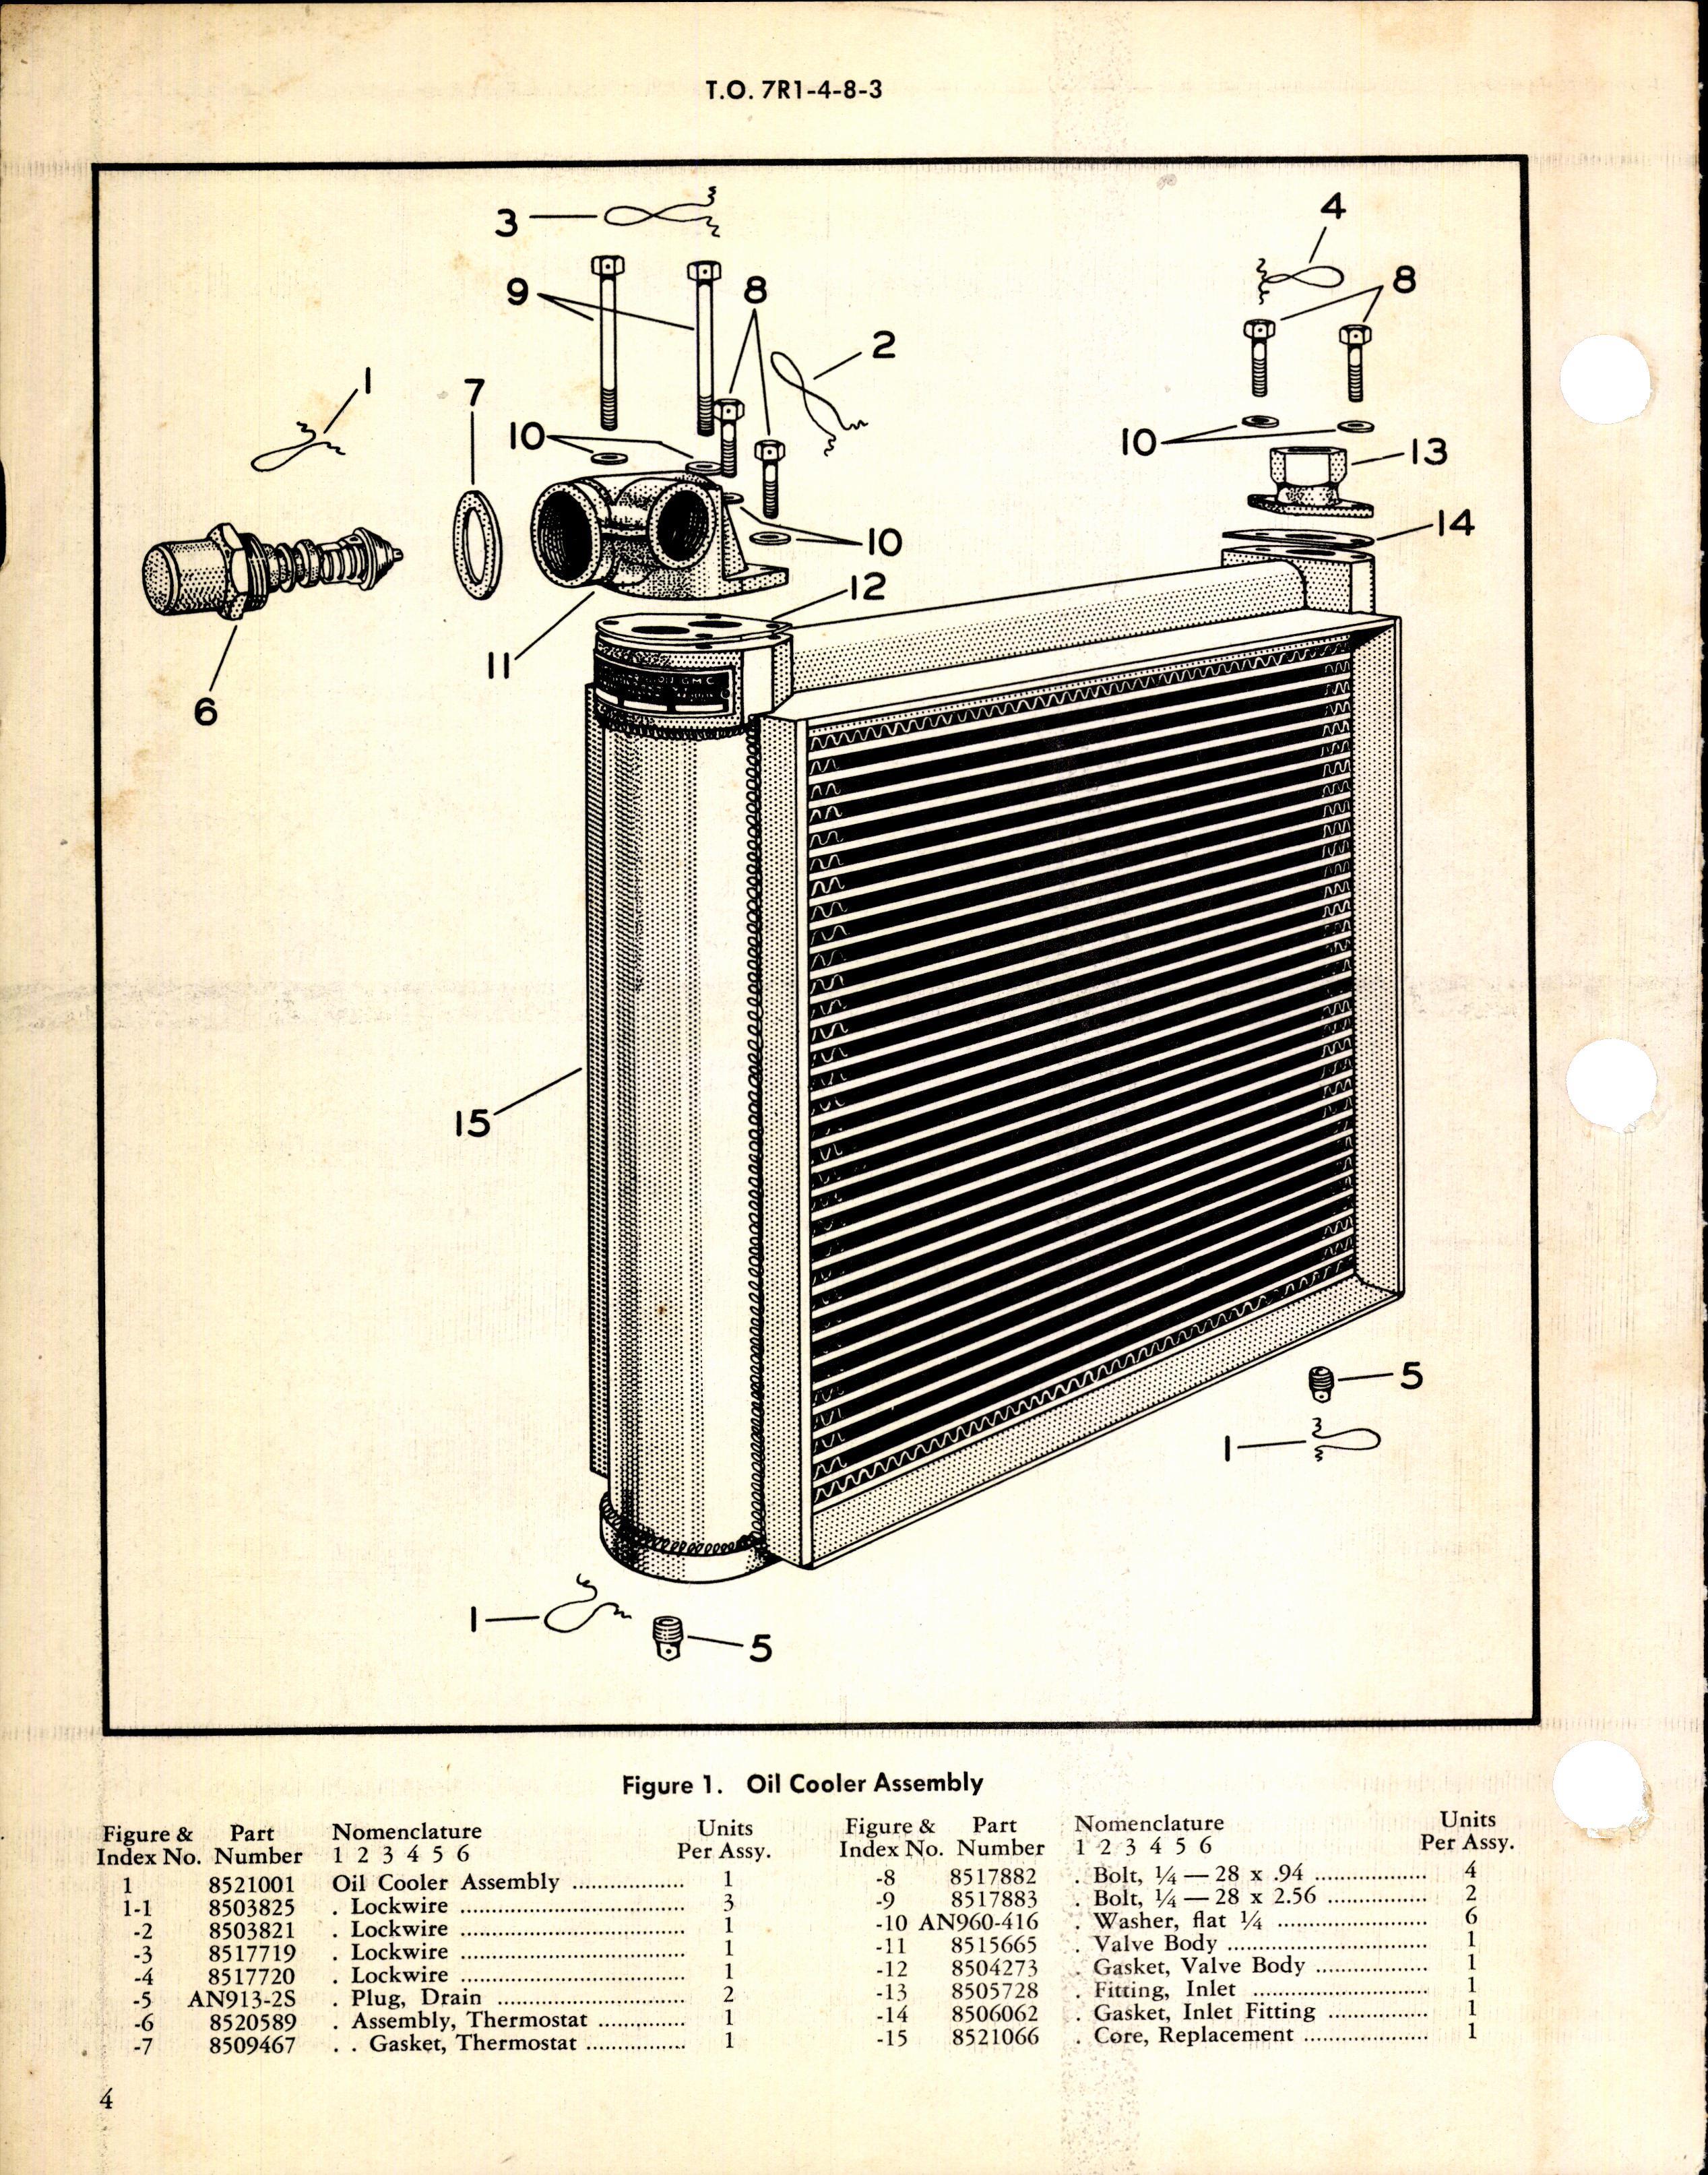 Sample page 4 from AirCorps Library document: Overhaul Instructions with Parts Breakdown Oil Cooler Assembly